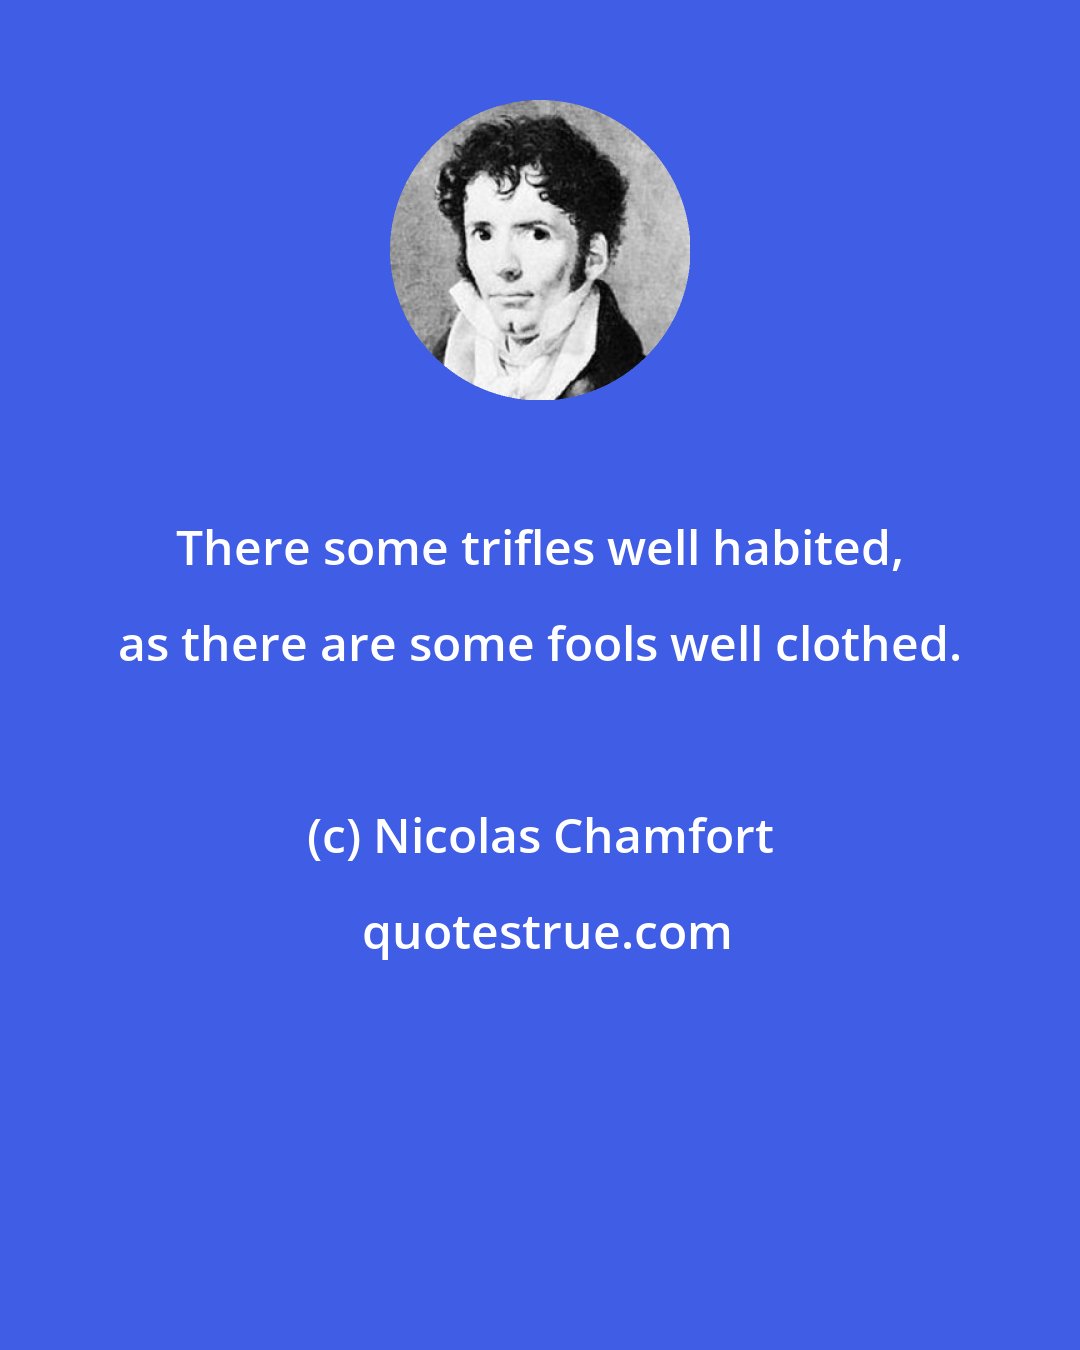 Nicolas Chamfort: There some trifles well habited, as there are some fools well clothed.